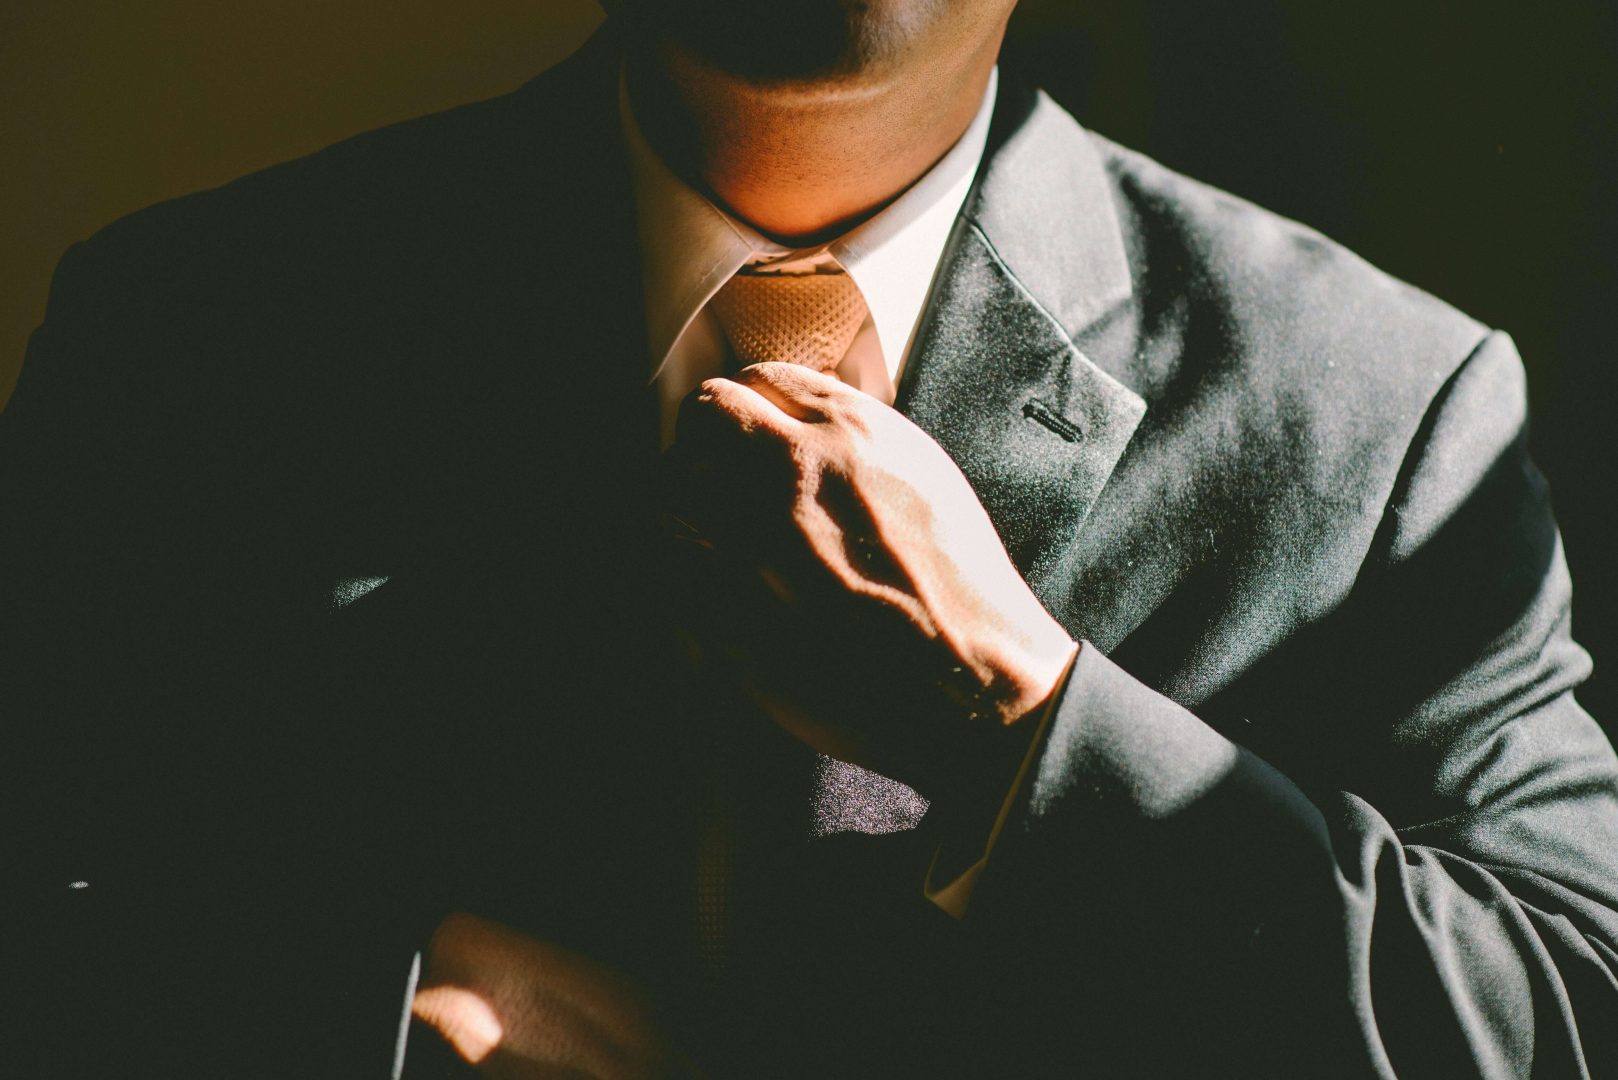 A custom WordPress theme is like a well-tailored suit.